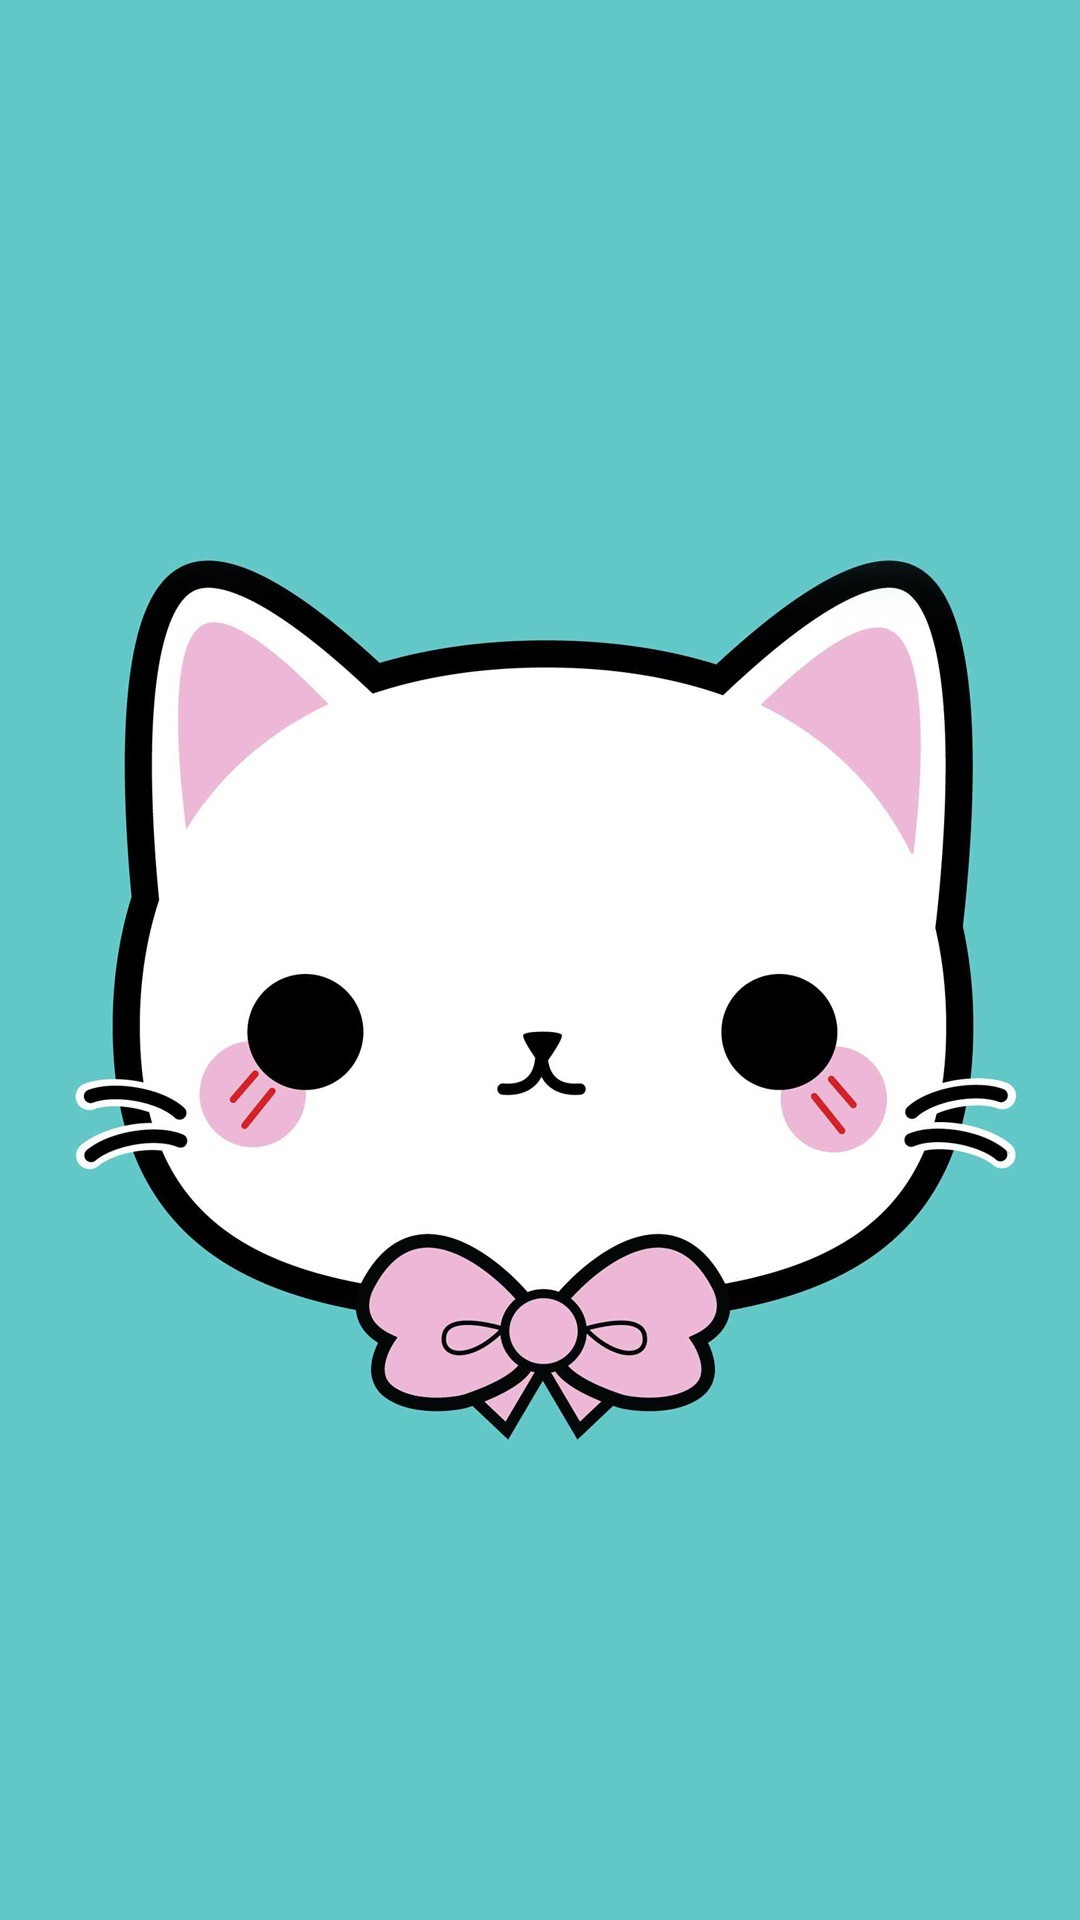 Bow Kitty And Like Omg Get Some Yourself Some Pawtastic - Cute Kawaii Cat Faces - HD Wallpaper 